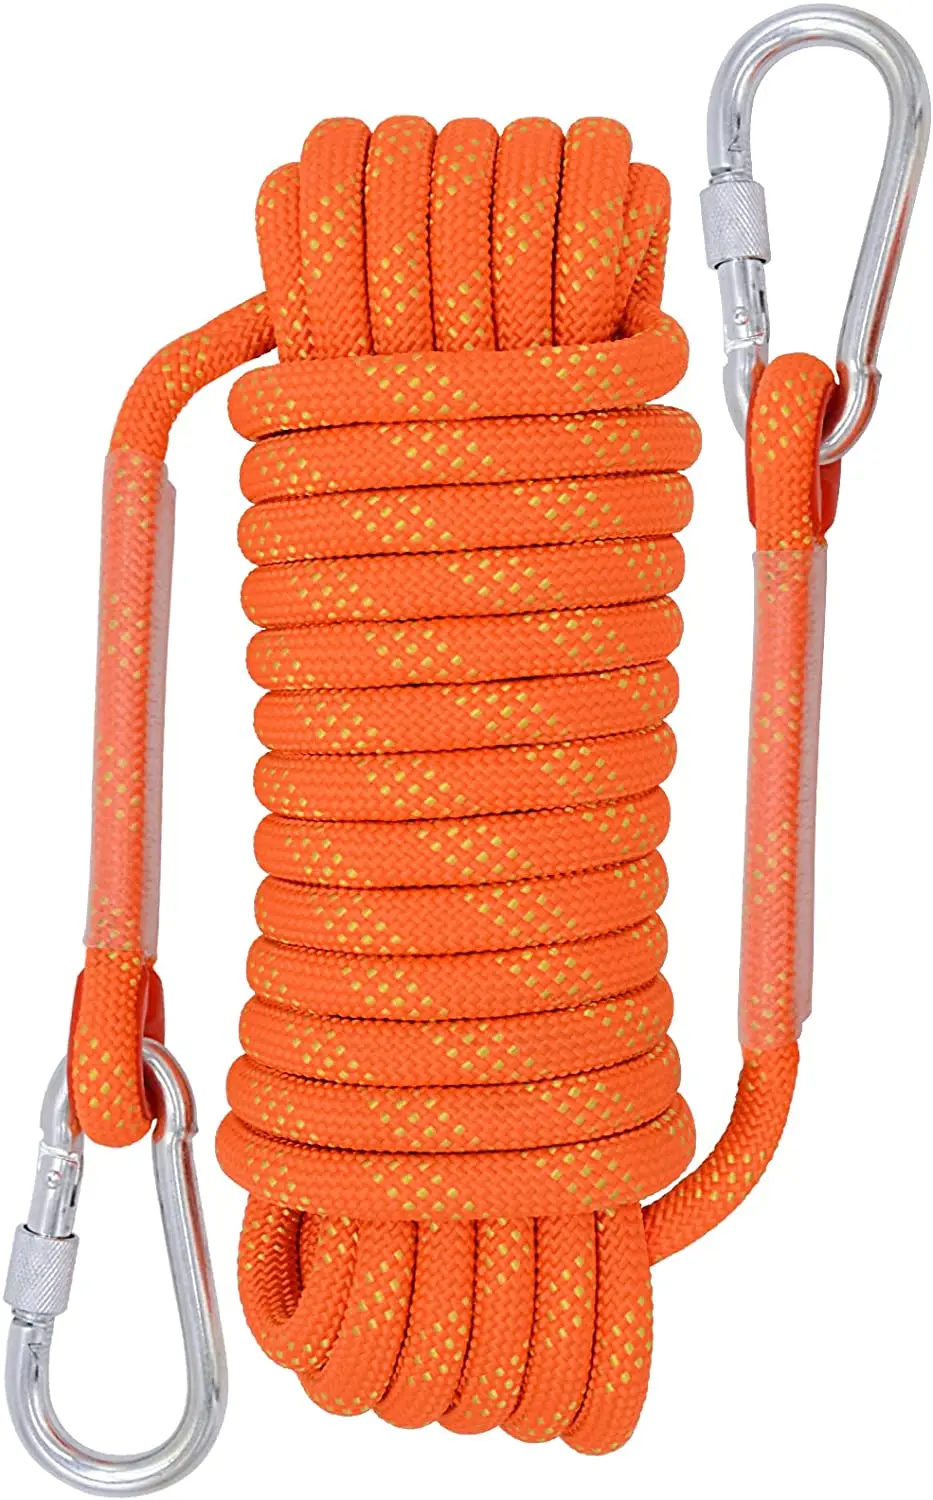 Climbing Rope Outdoor Rappelling Cord with 2 Lock Carabiner 3300lb